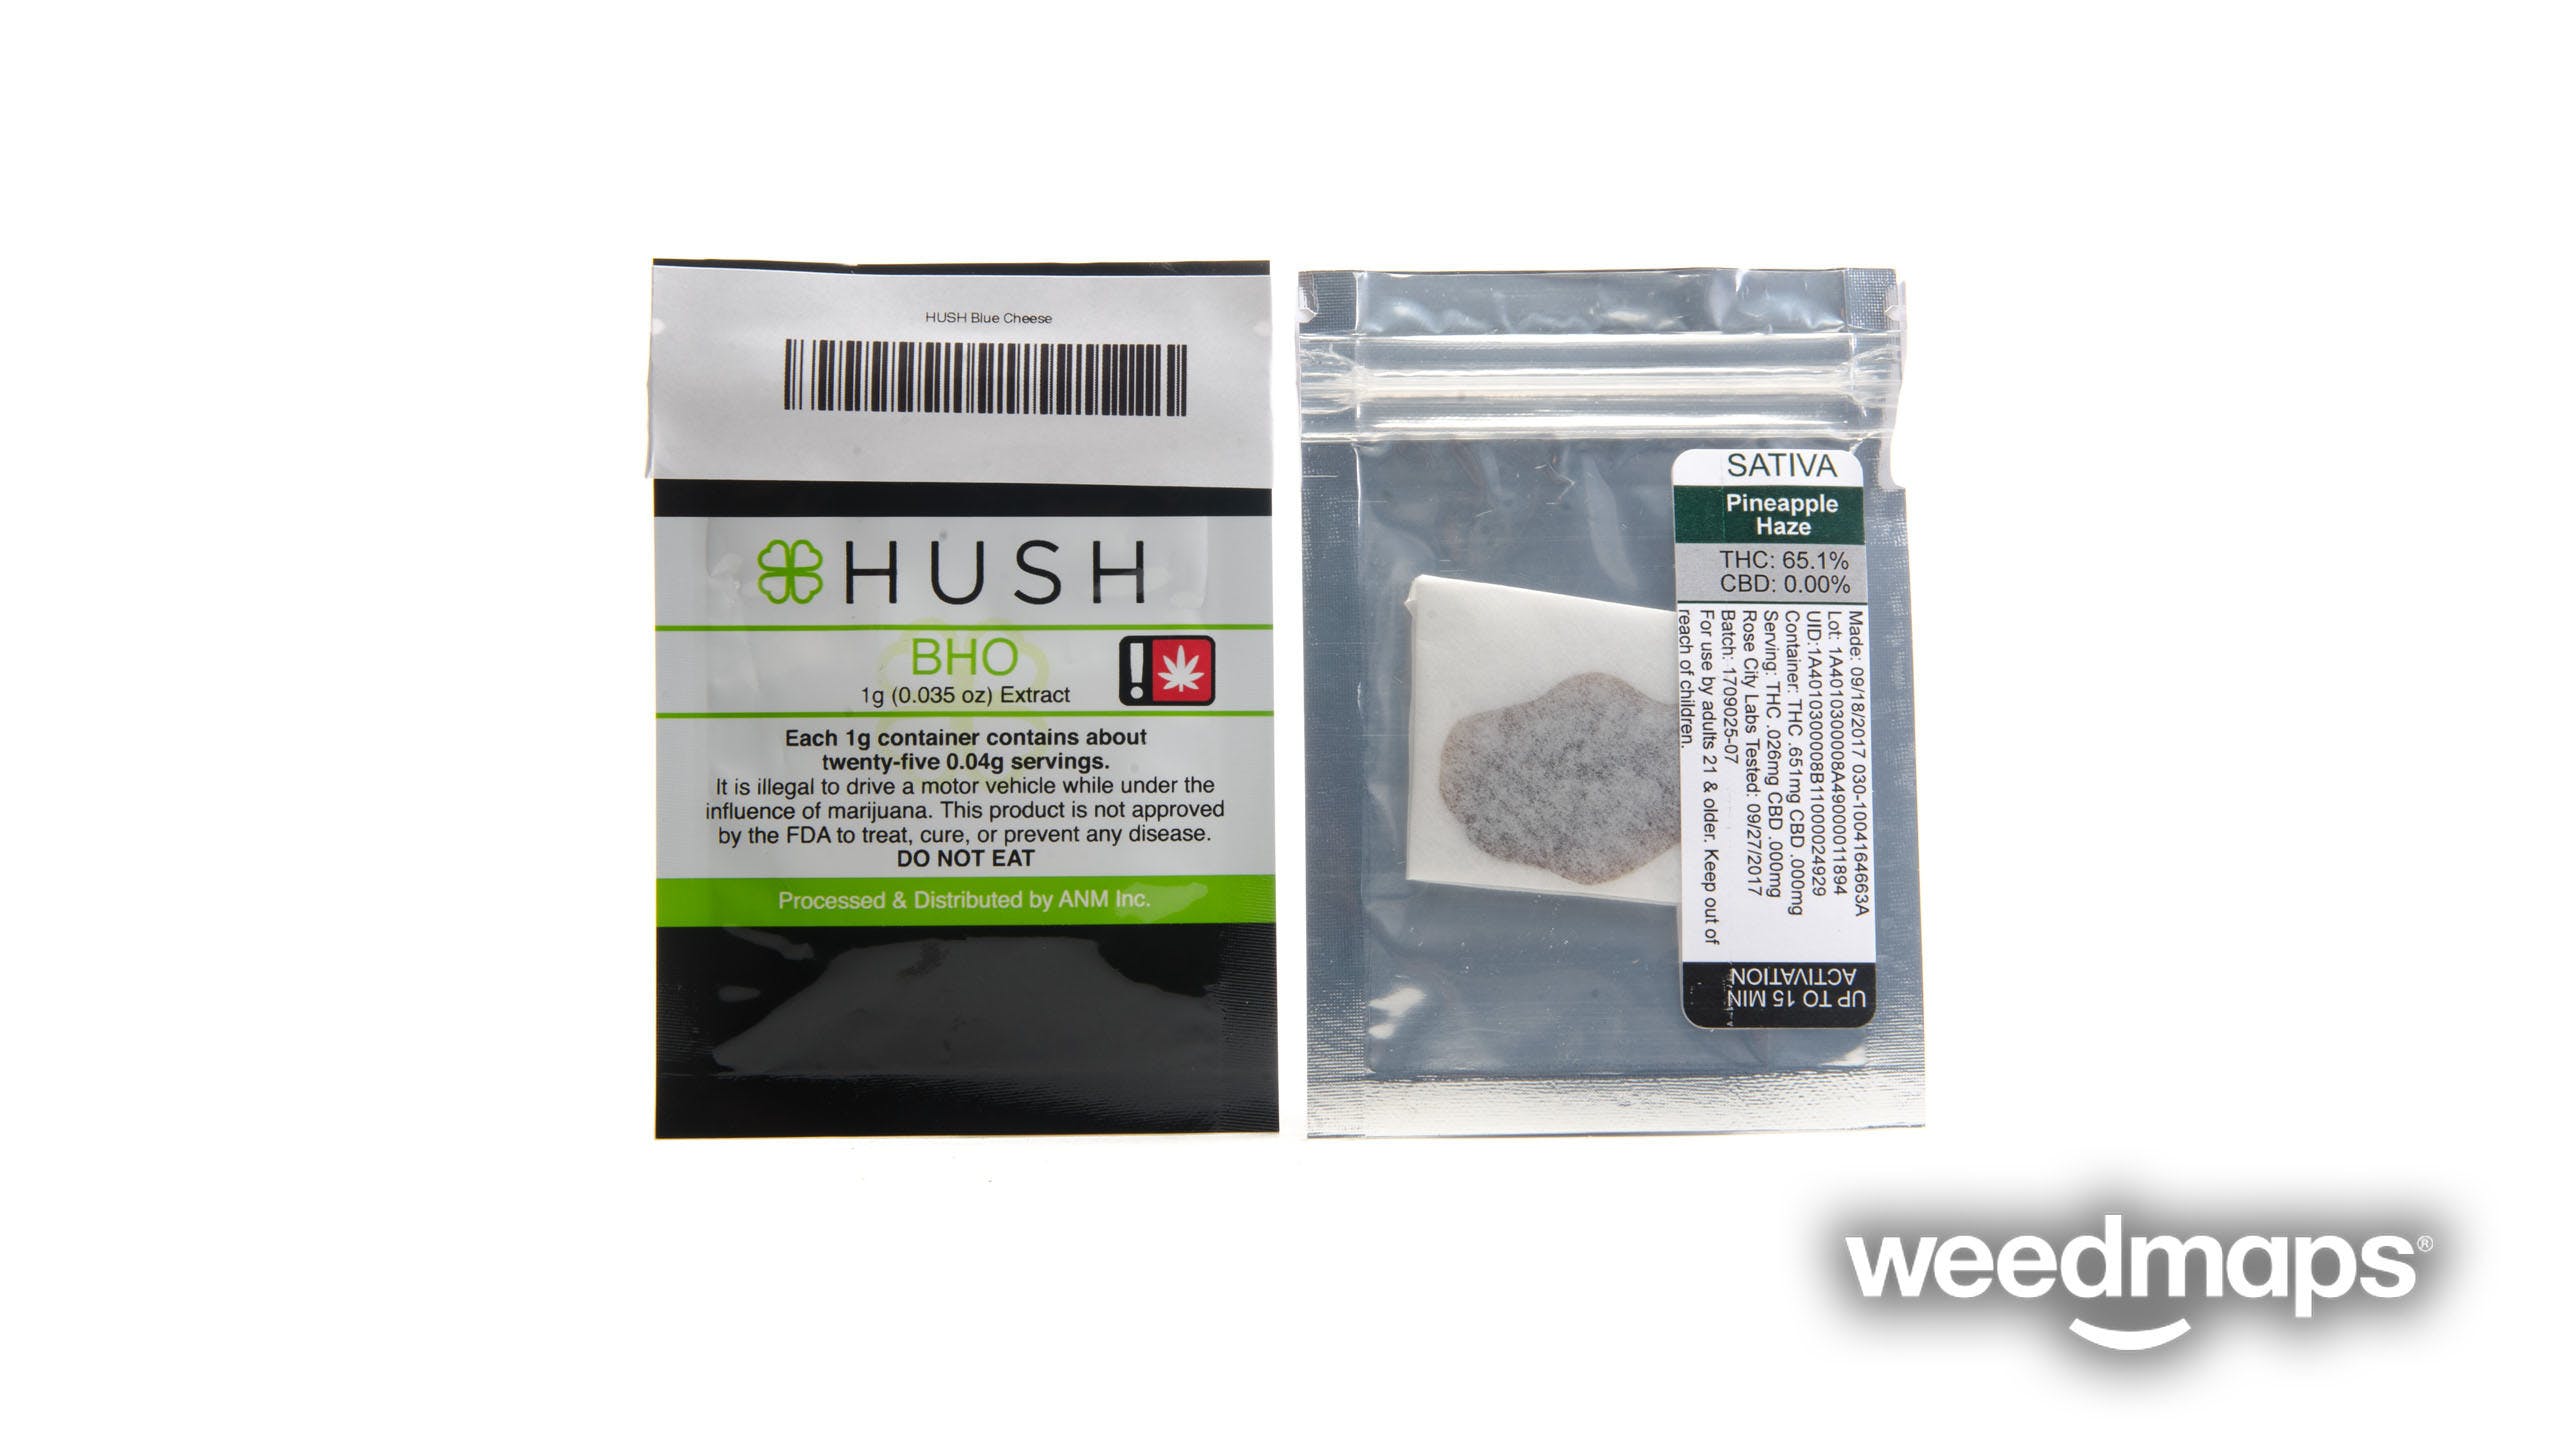 concentrate-hush-pineapple-haze